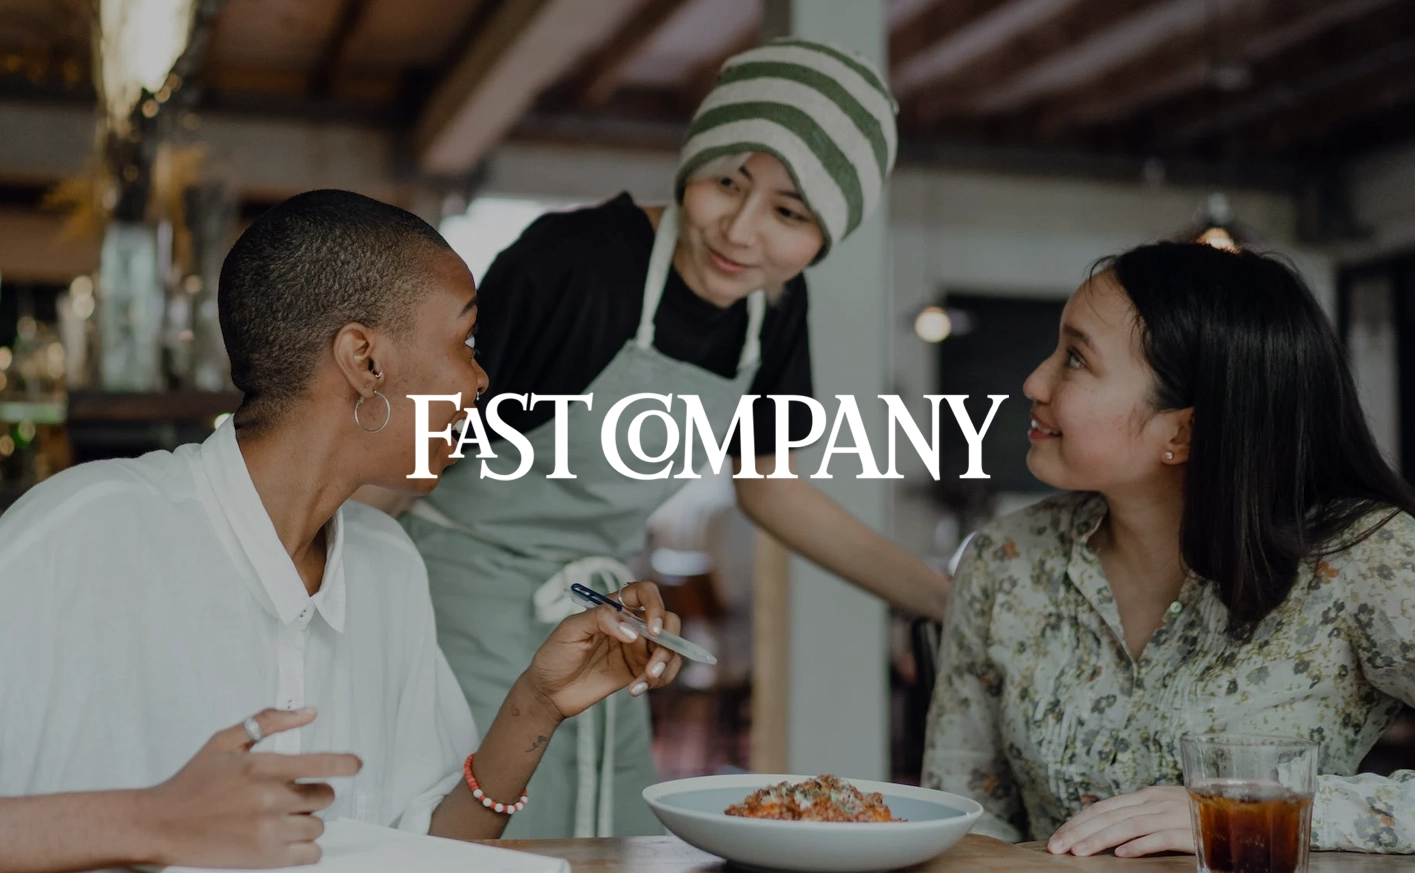 The Fast Company logo on top of an image of two people talking to a server at a restaurant